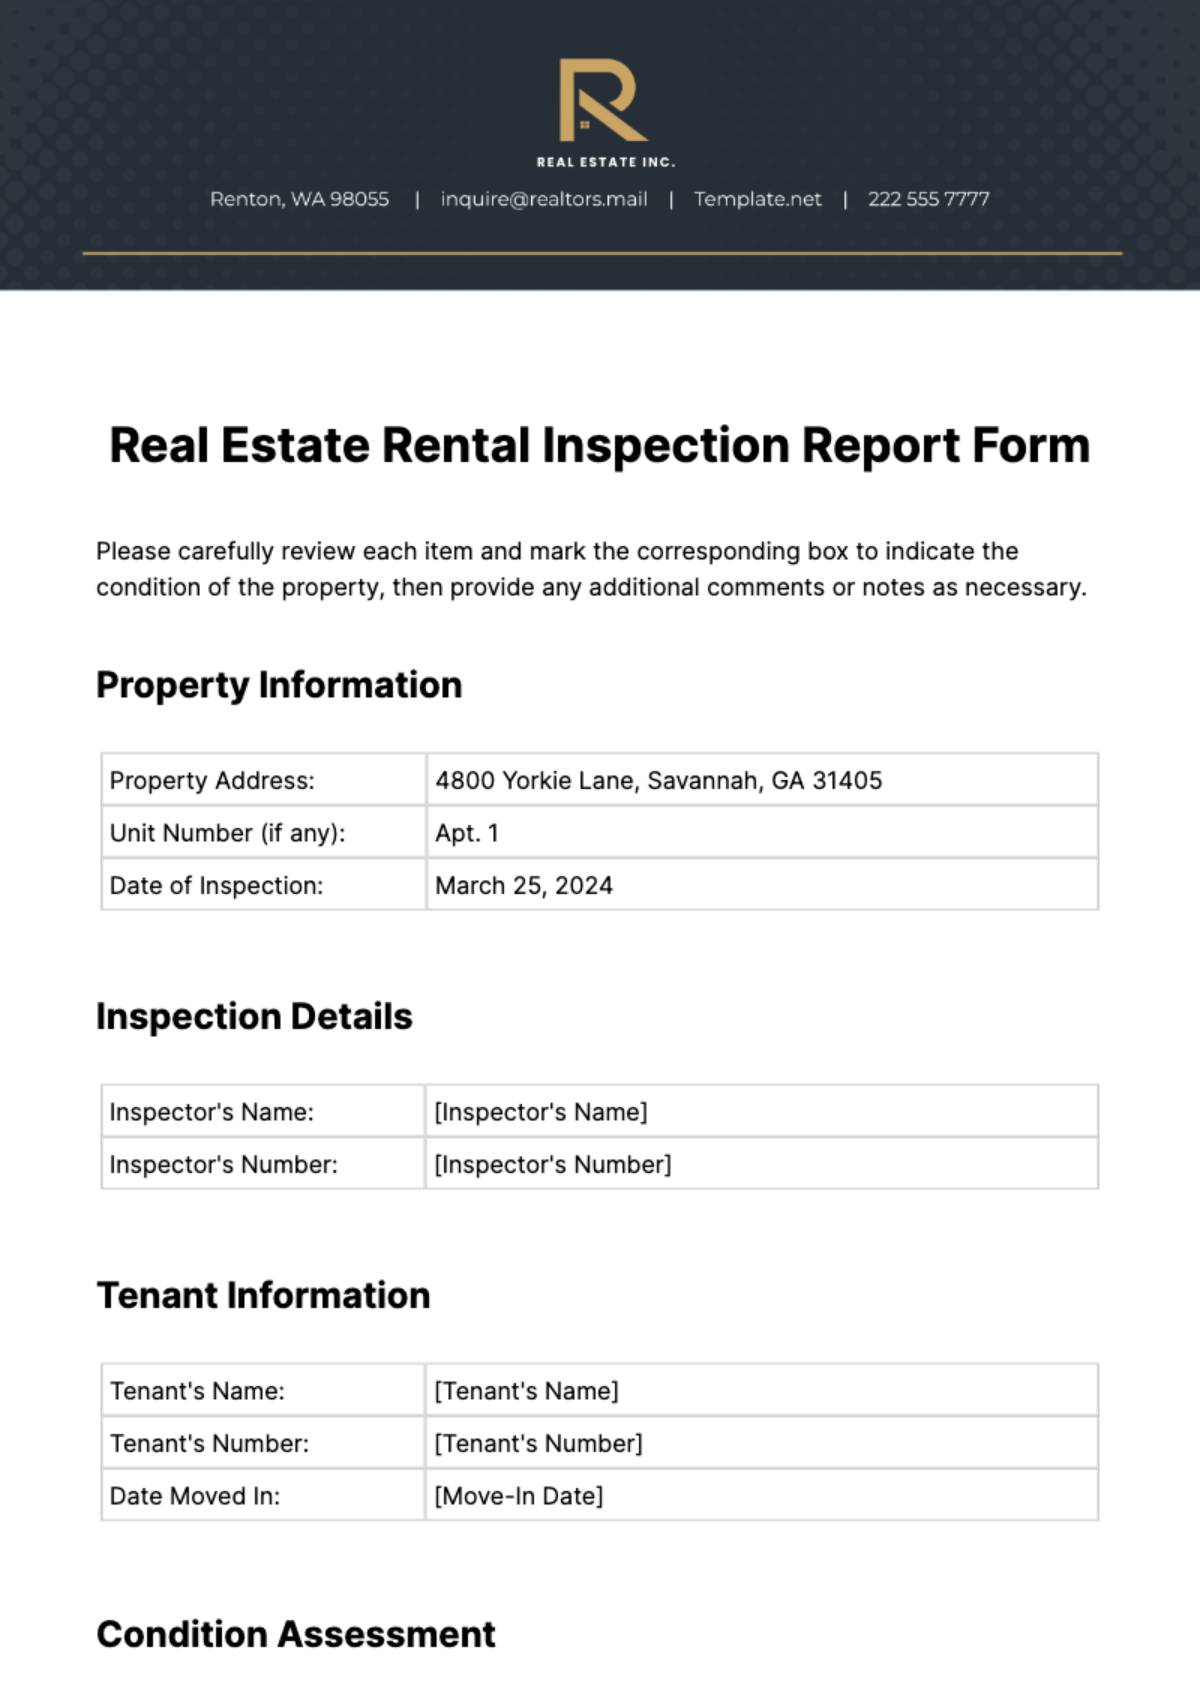 Real Estate Rental Inspection Report Form Template